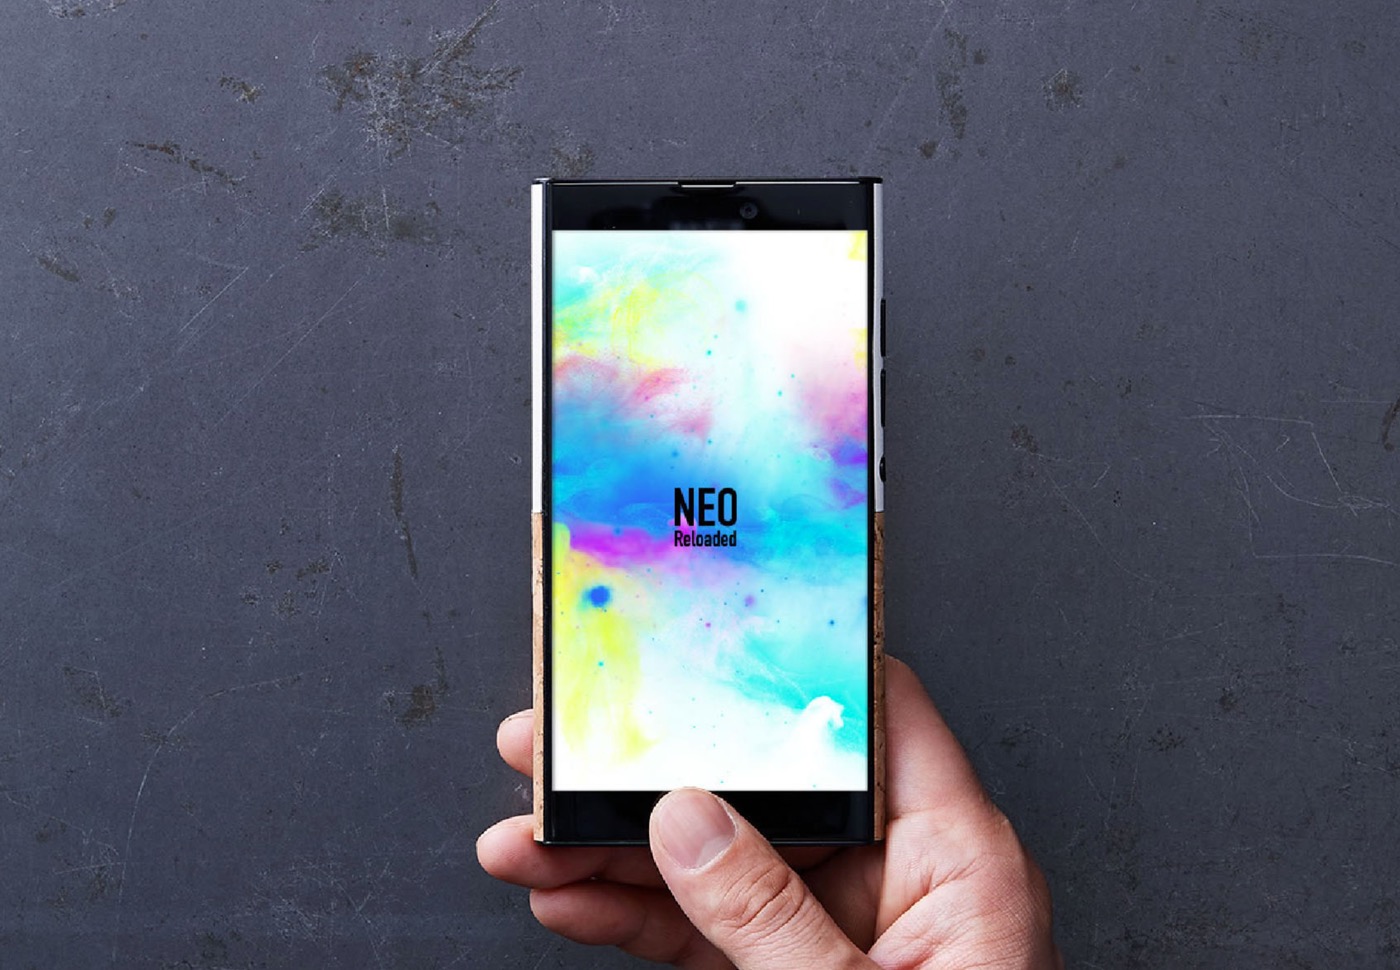 ｢NuAns NEO [Reloaded]｣、一部の家電量販店で実機展示を開始